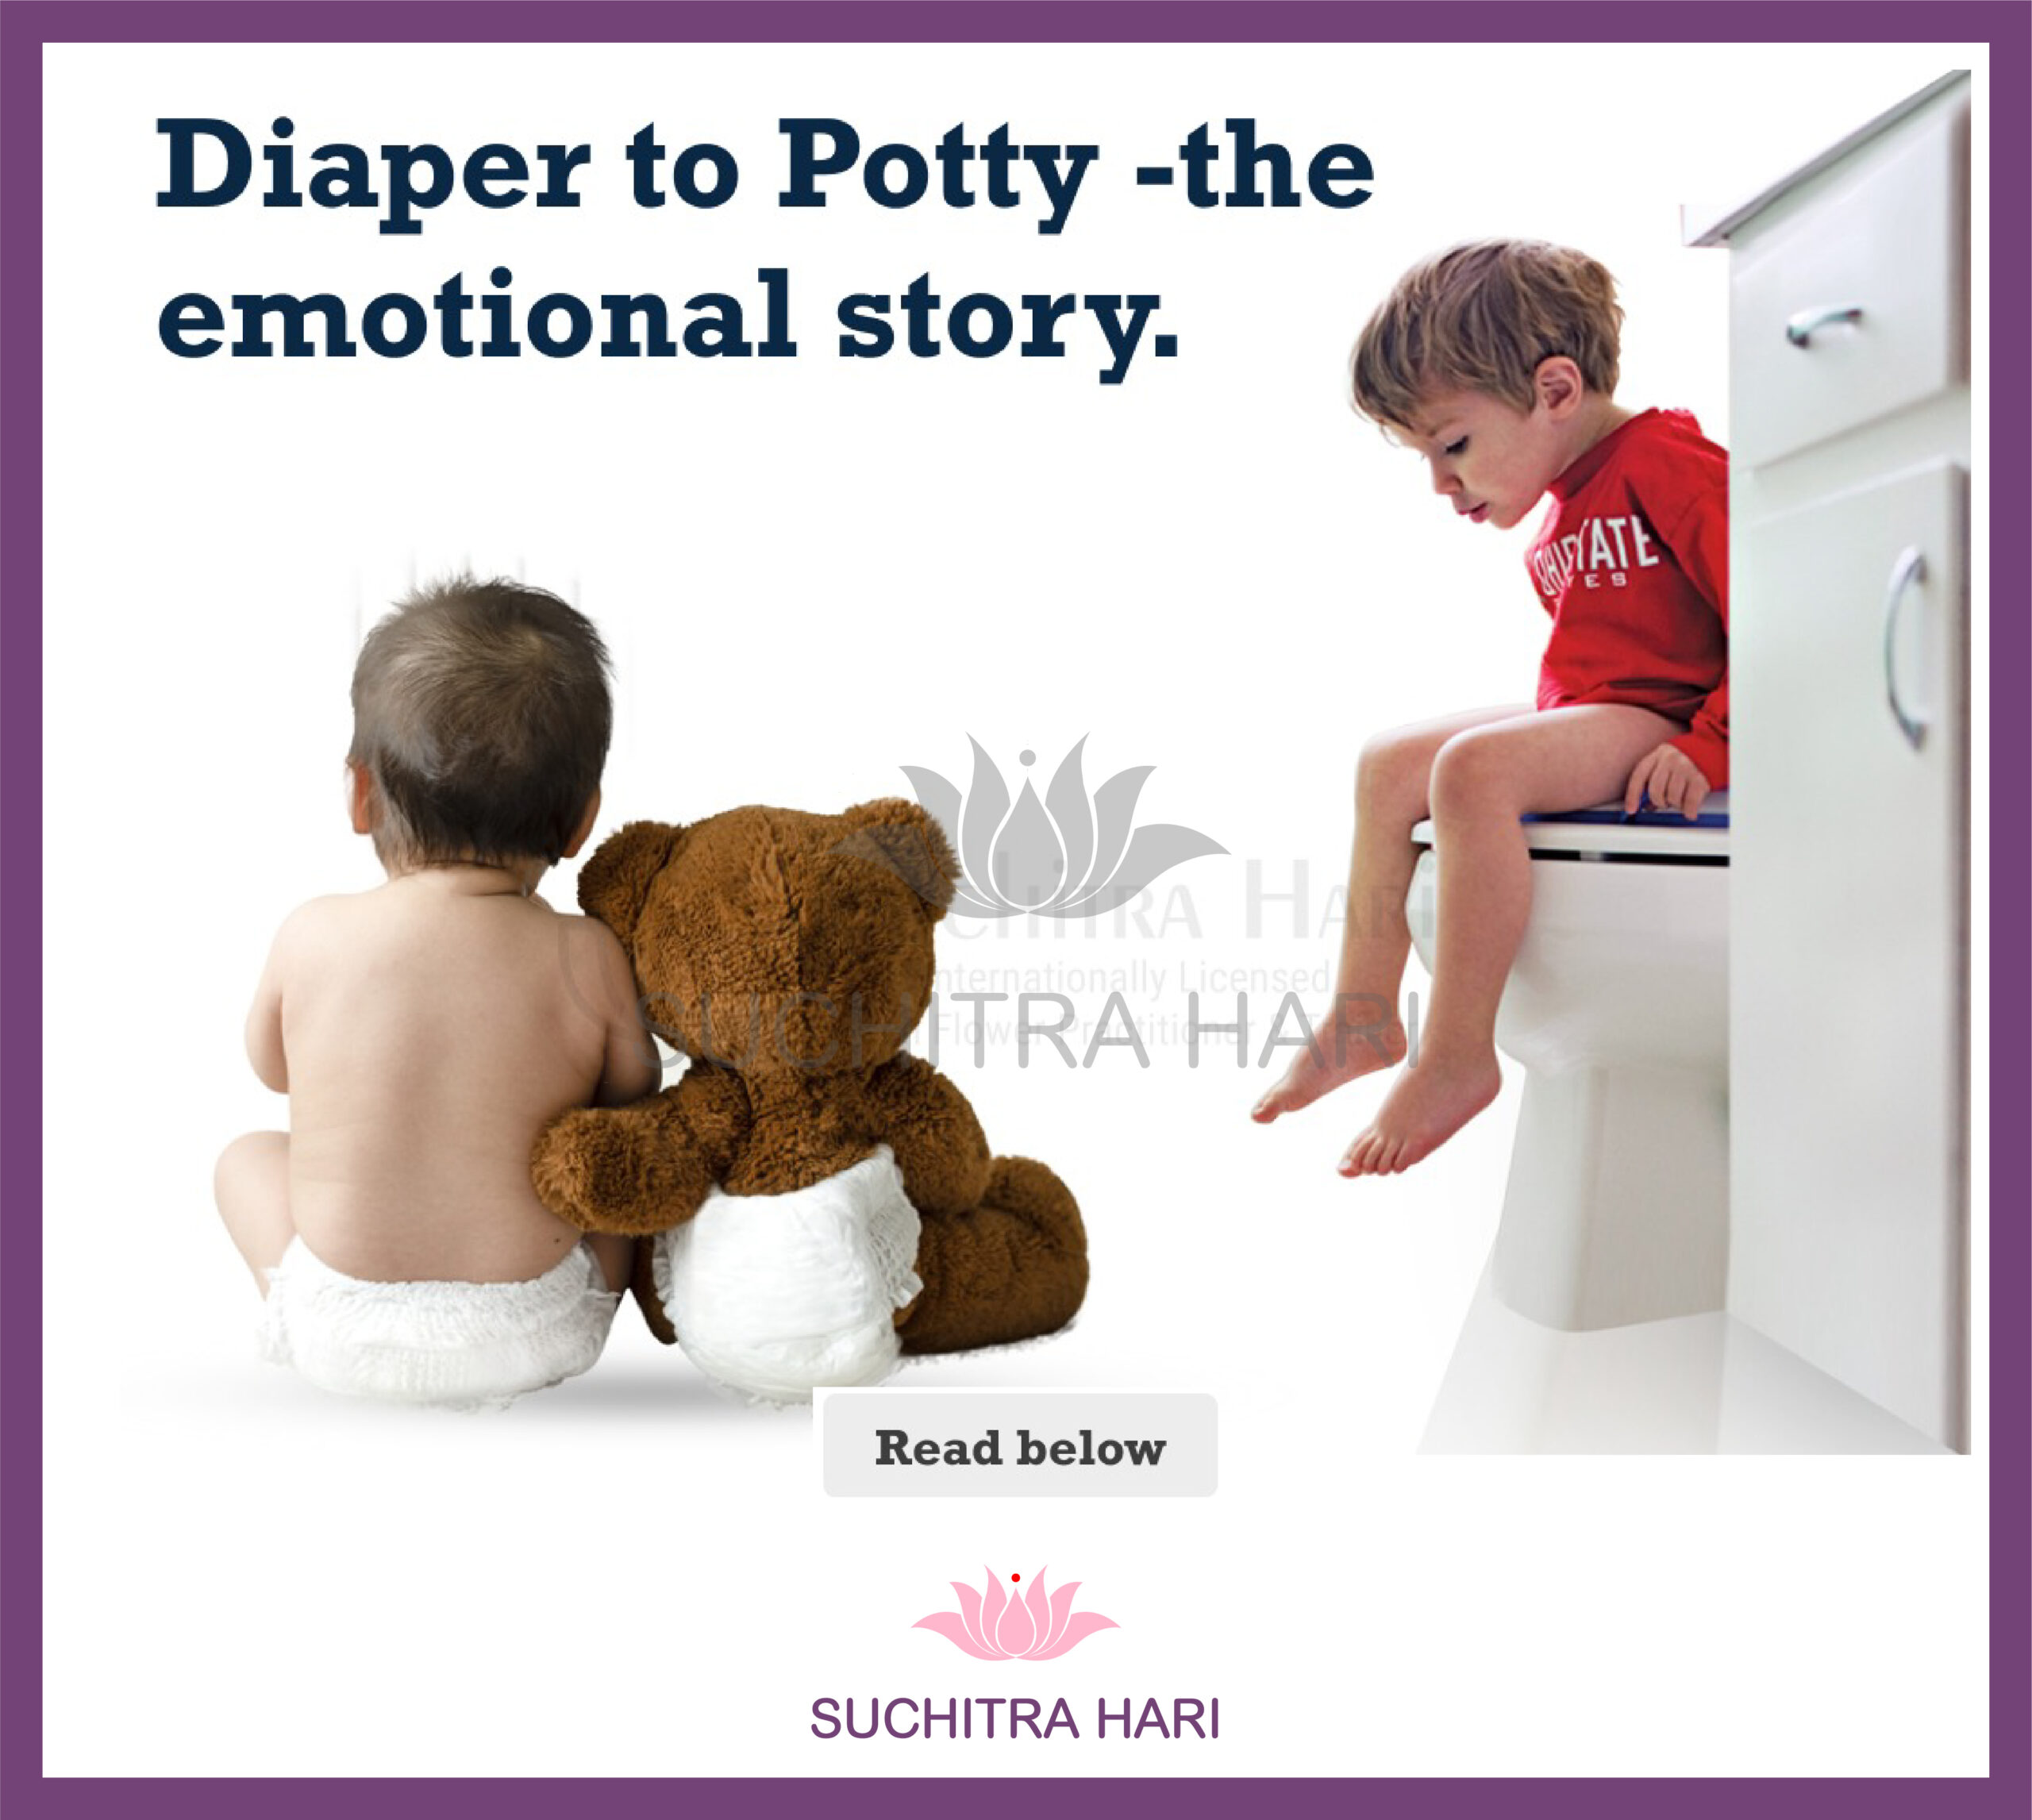 Diaper to Potty – the emotional story.